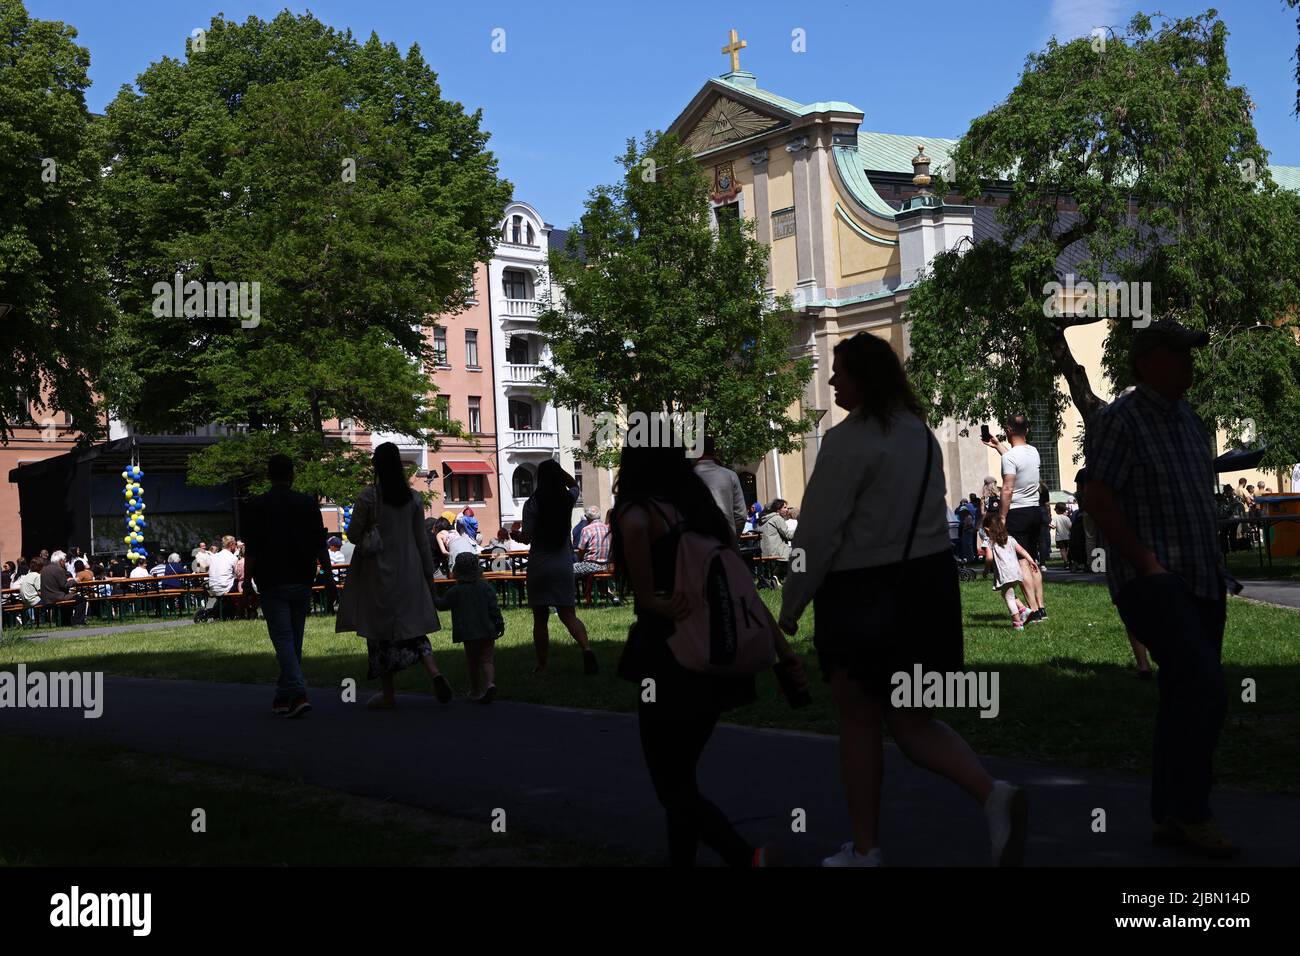 The celebration of the National Day of Sweden  in and around Olaiparken in central Norrköping, Sweden, on Monday. Stock Photo